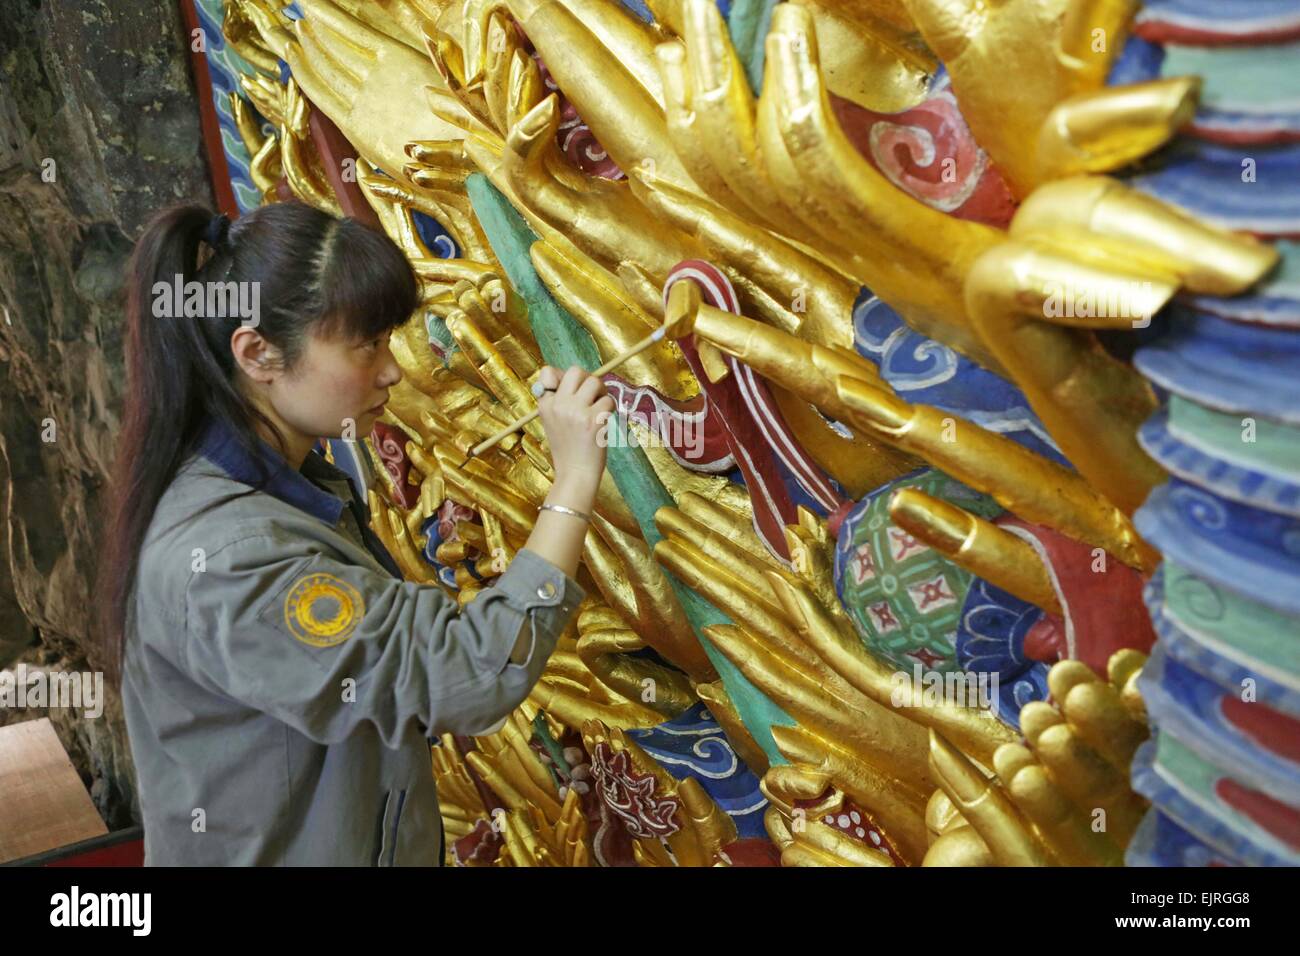 Chongqing, China. 31st Mar, 2015. A worker restores a sculpture of Qianshou Guanyin (bodhisattva with a thousand hands) on Mount Baoding in Dazu District in the municipality of Chongqing, southwest China, March 31, 2015. The sculpture with gold foil, carved in the cave with 7.7 meters high and 12.5 meters wide, could date back to Southern Song Dynasty (1127 to 1279). The restoration work has entered the final phase and is supposed to be finished in June this year, after which the sculpture will be reopened to public. © Luo Guojia/Xinhua/Alamy Live News Stock Photo